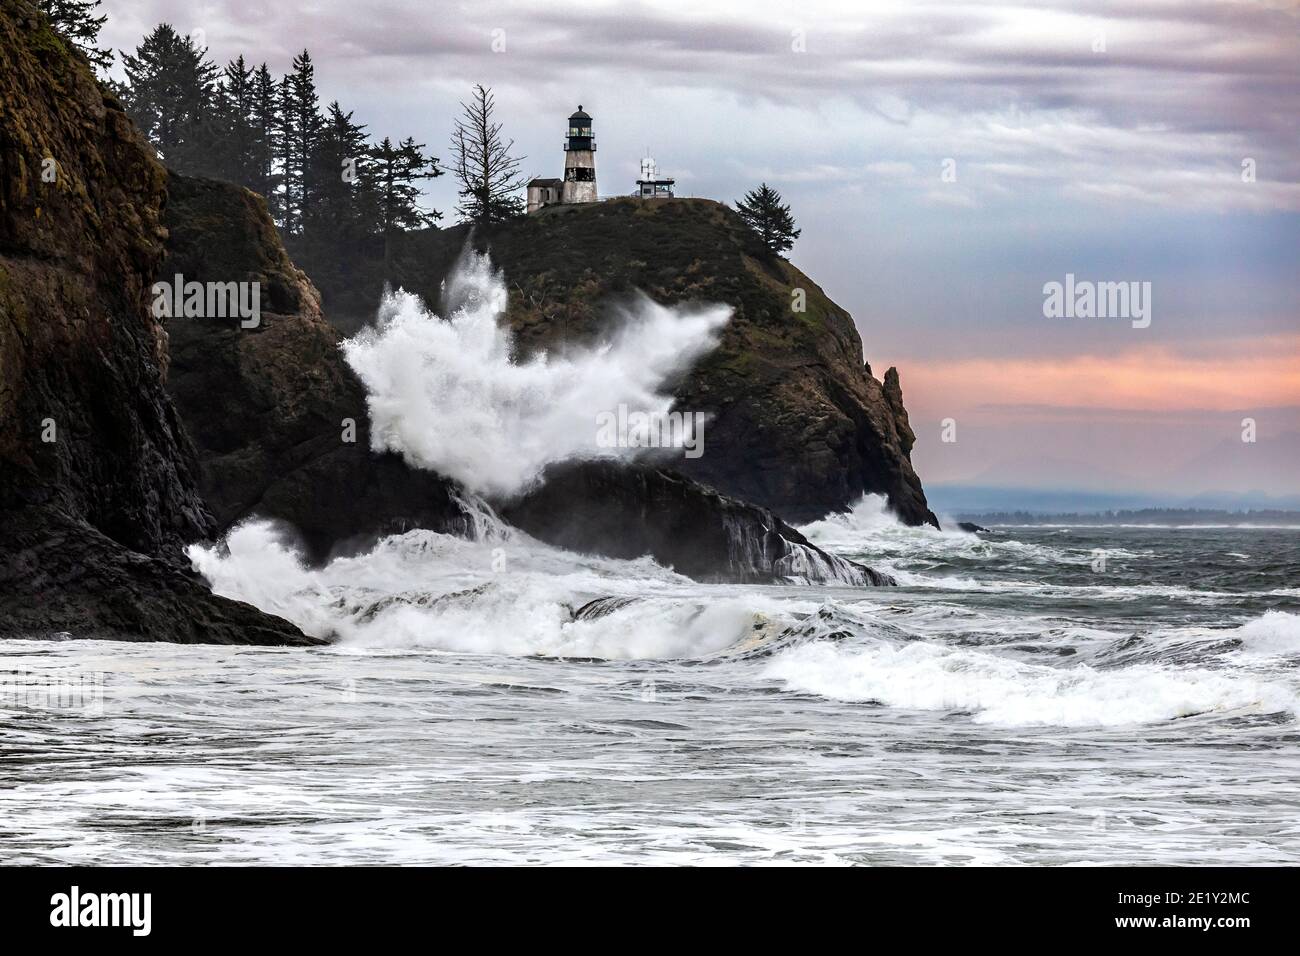 WA20033-00.....WASHIHGTON - Crashing surf at Cape Disappointment Lighthouse near the outflow of the Columbia River in Cape Disappointment State Park. Stock Photo